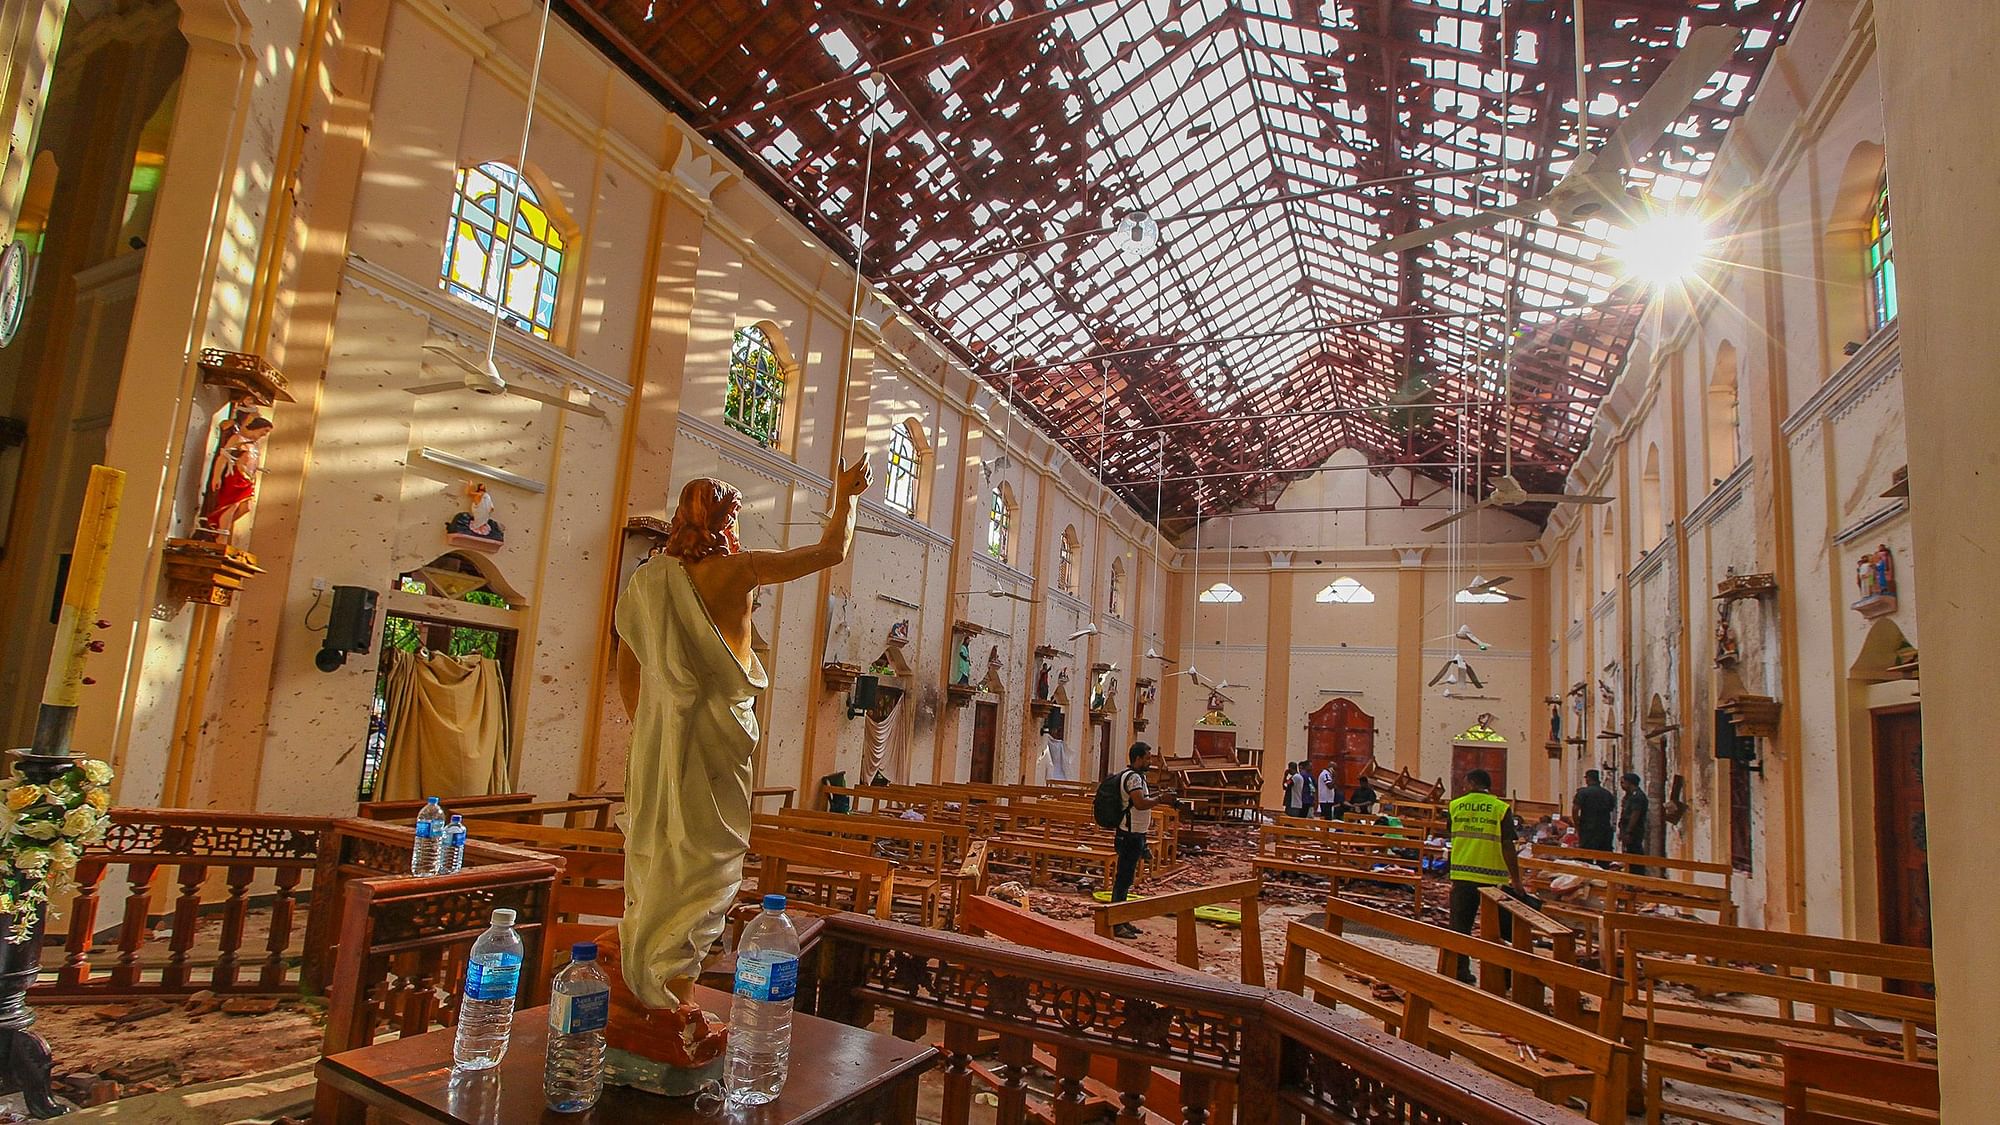 The Islamic State had claimed responsibility for a series of devastating suicide attacks that killed 359 people in Sri Lanka.